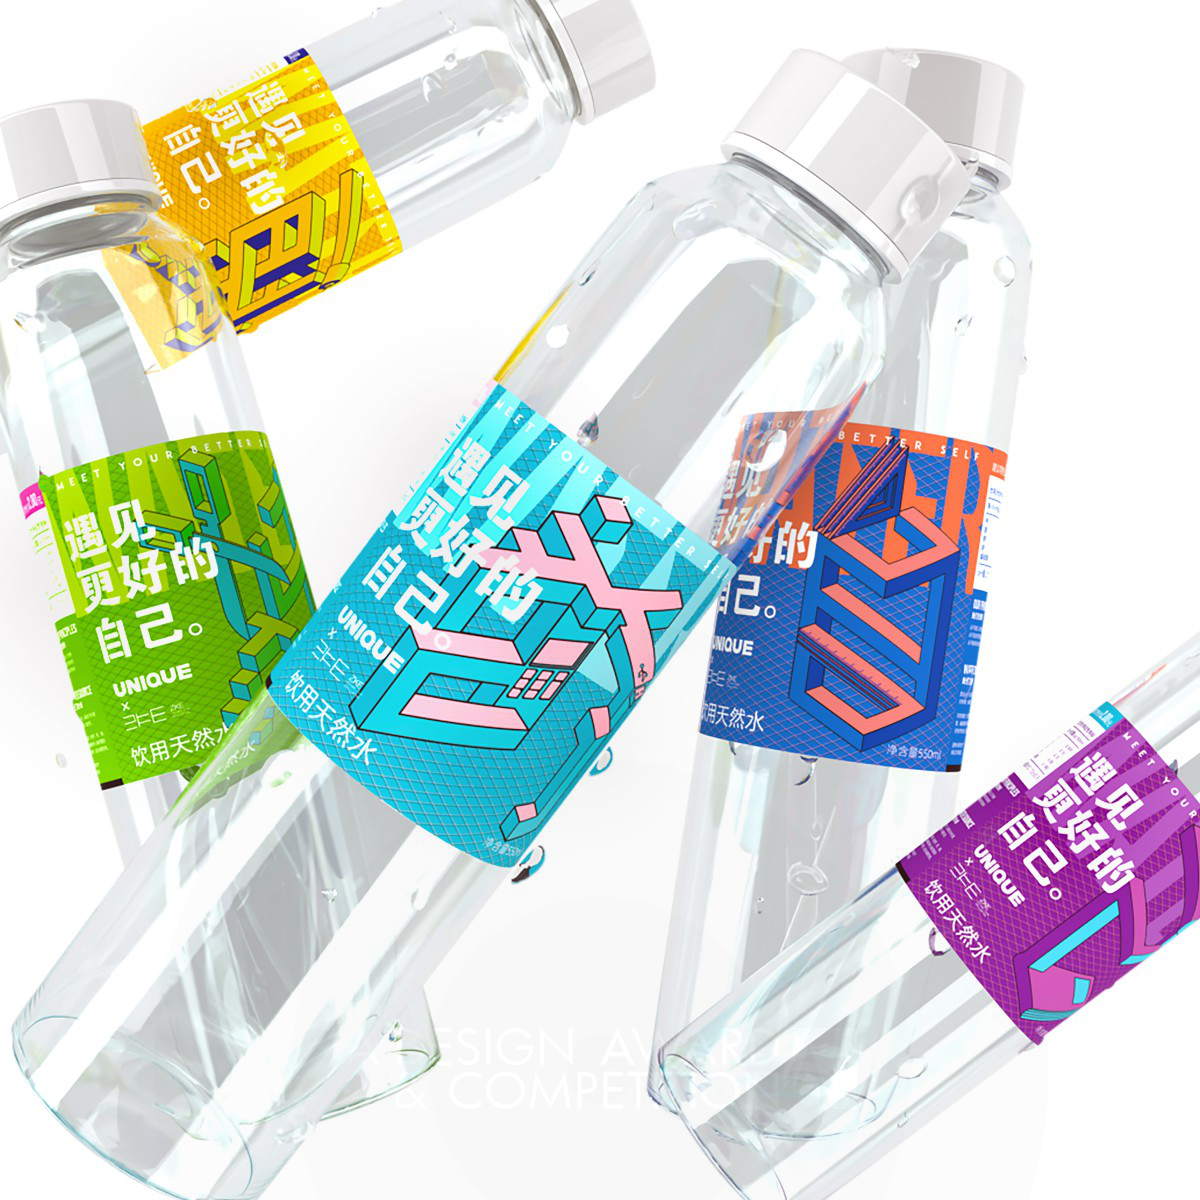 WEIWEI ZHANG's Puzzle: Innovative Water Packaging Design